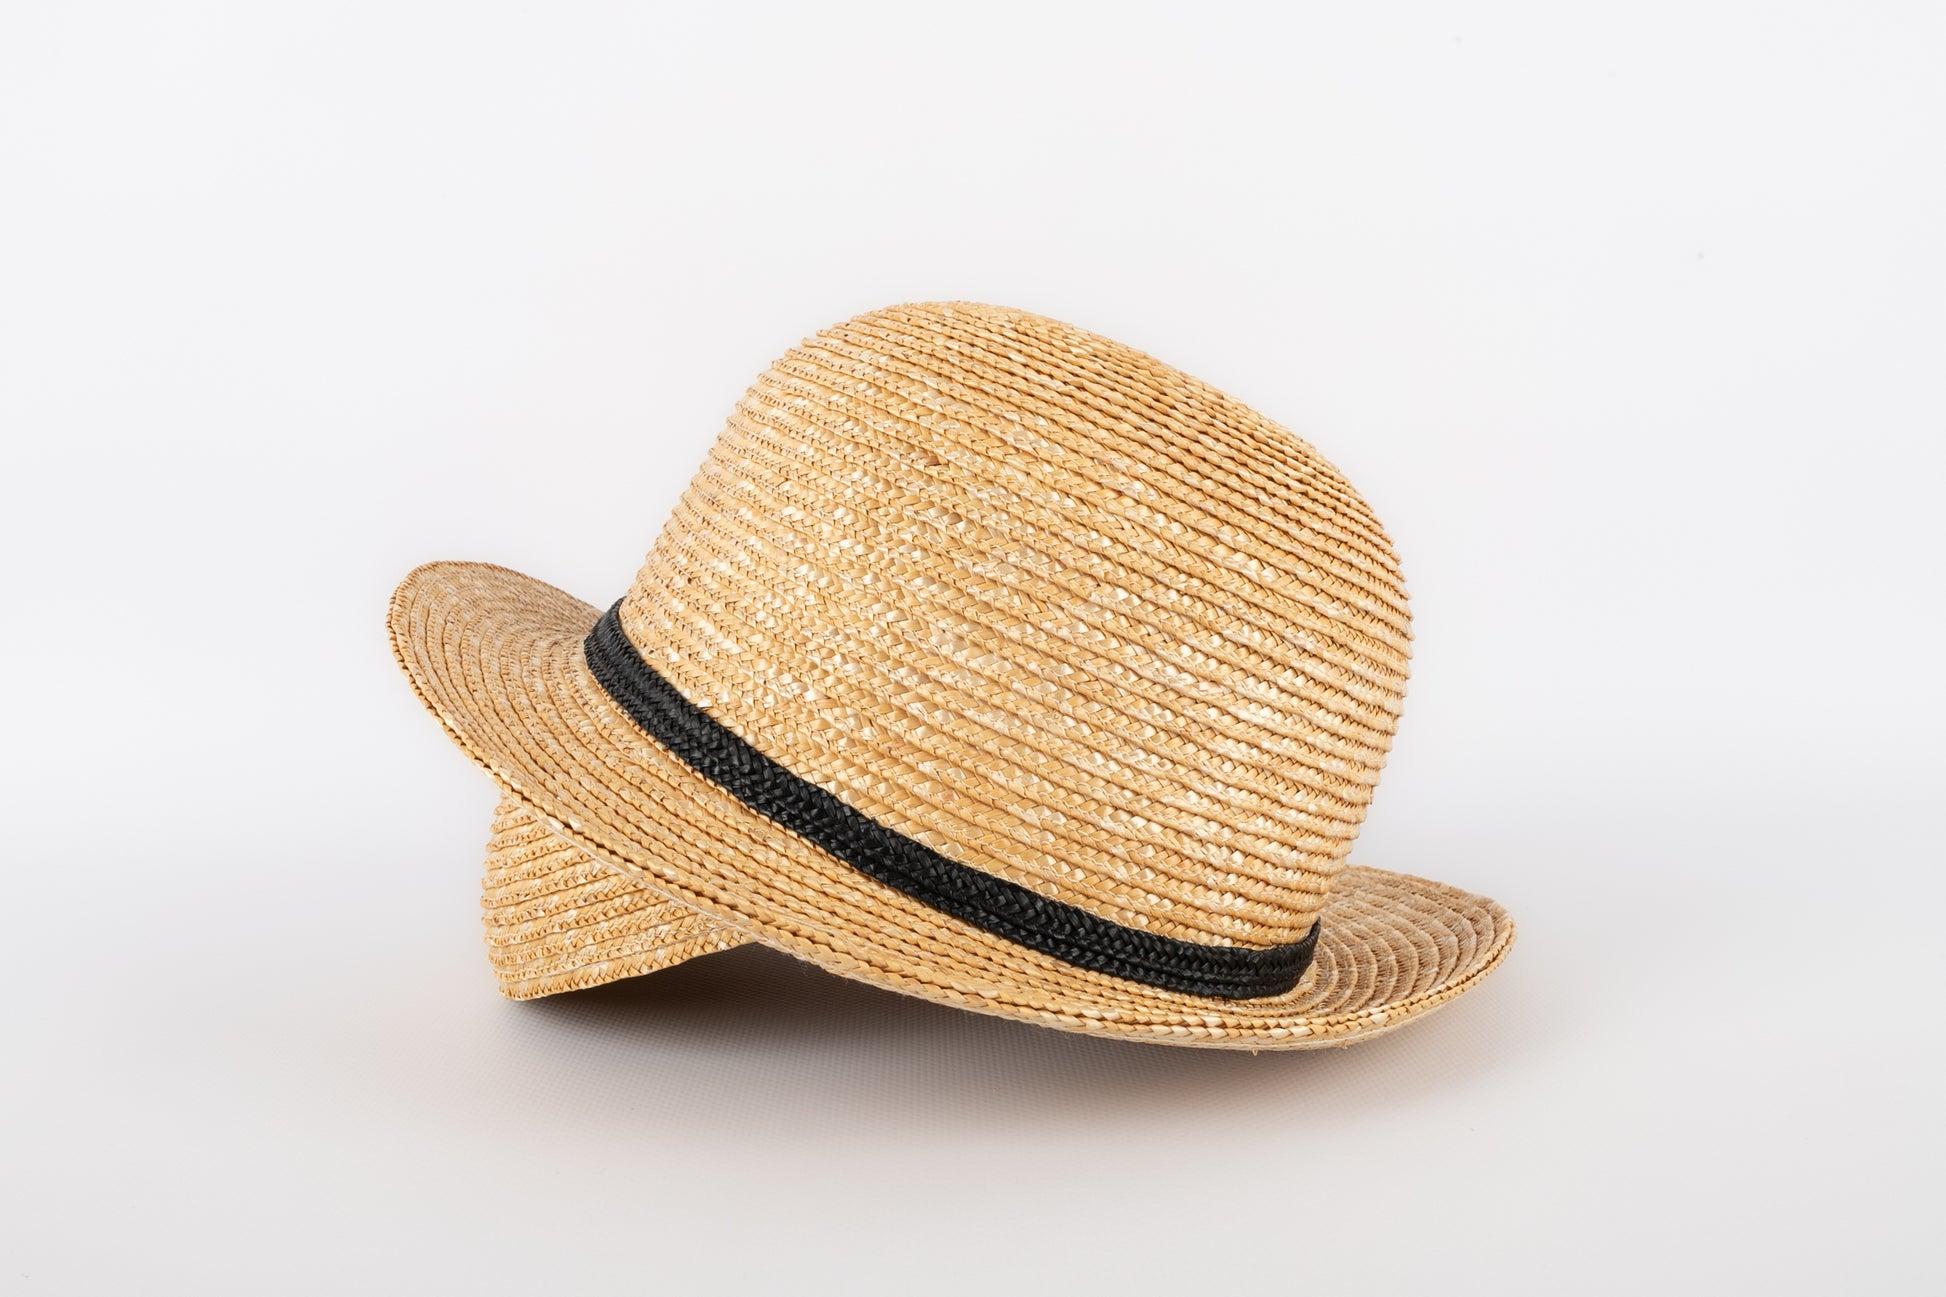 Unknown  - Straw asymmetrical hat.

Additional information: 
Condition: Very good condition
Dimensions: Head circumference: 51 cm

Seller Reference: CHP22